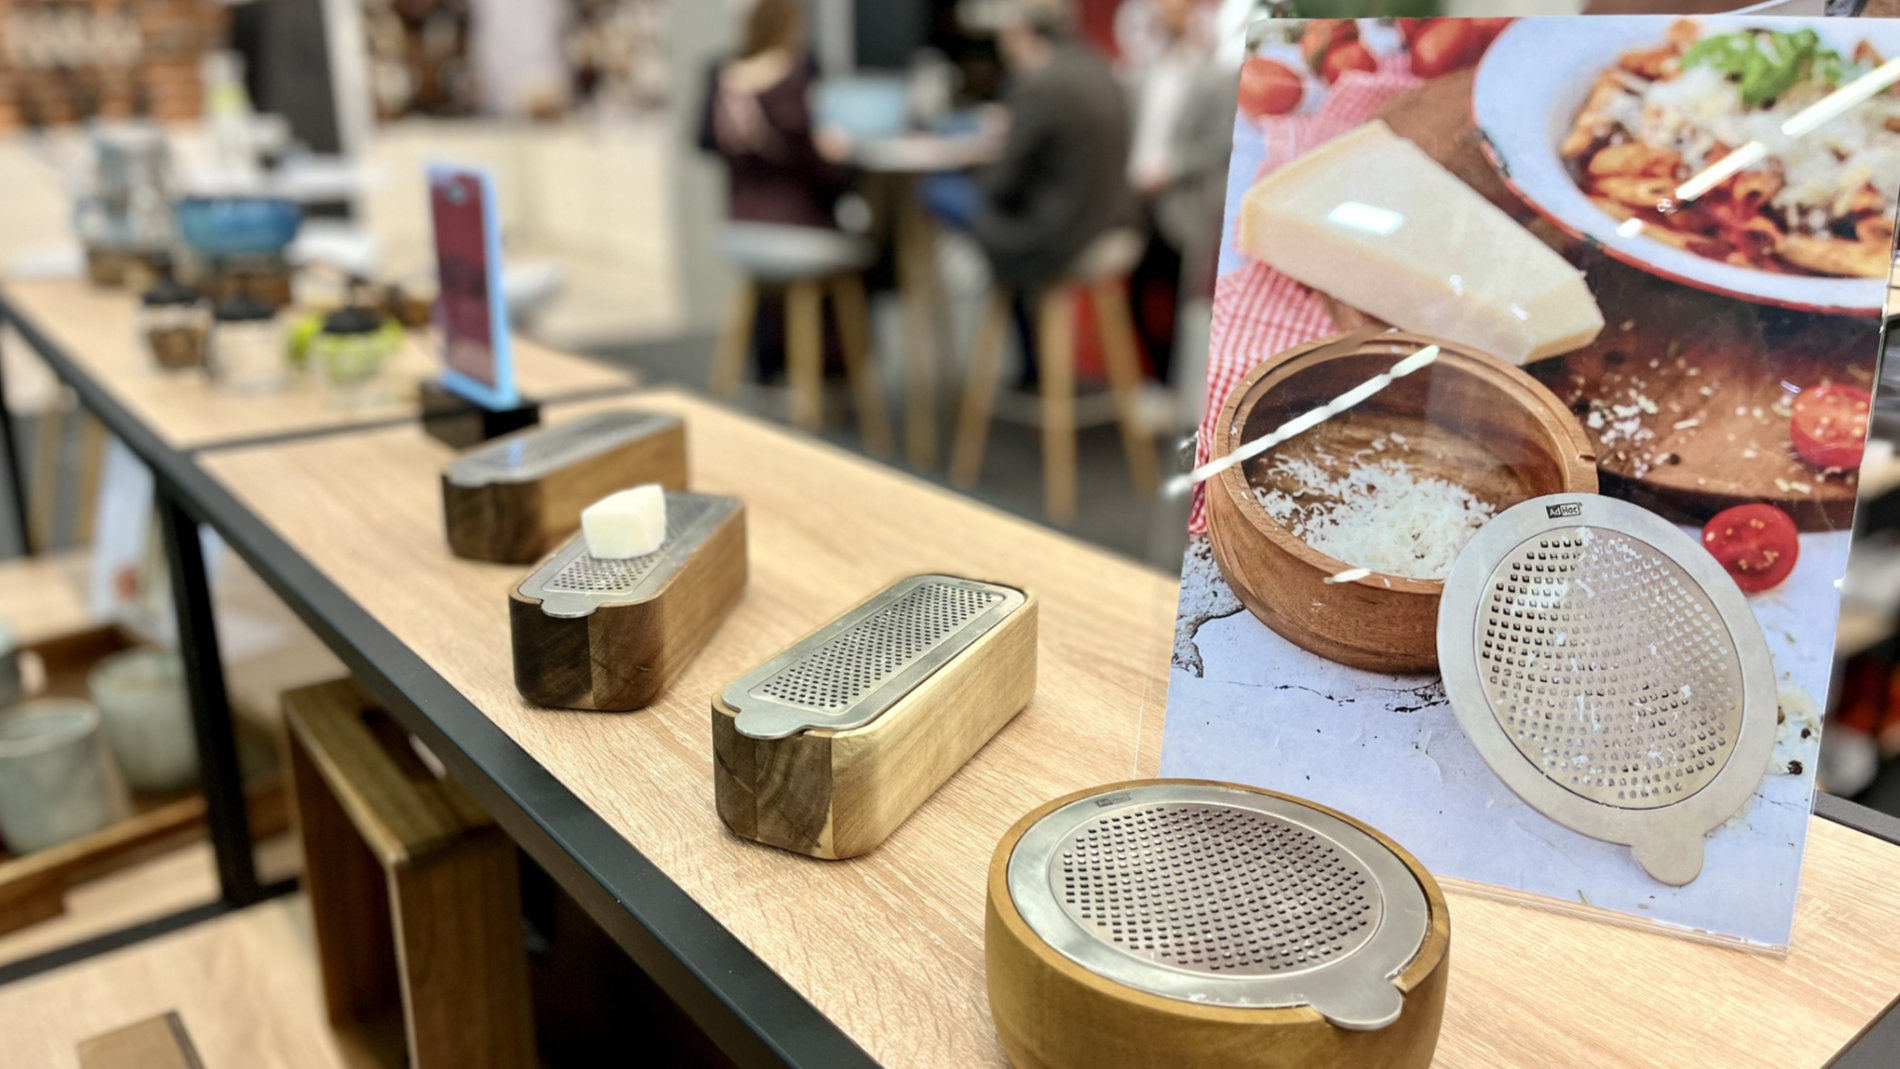 Parmesan grater at the Ambiente